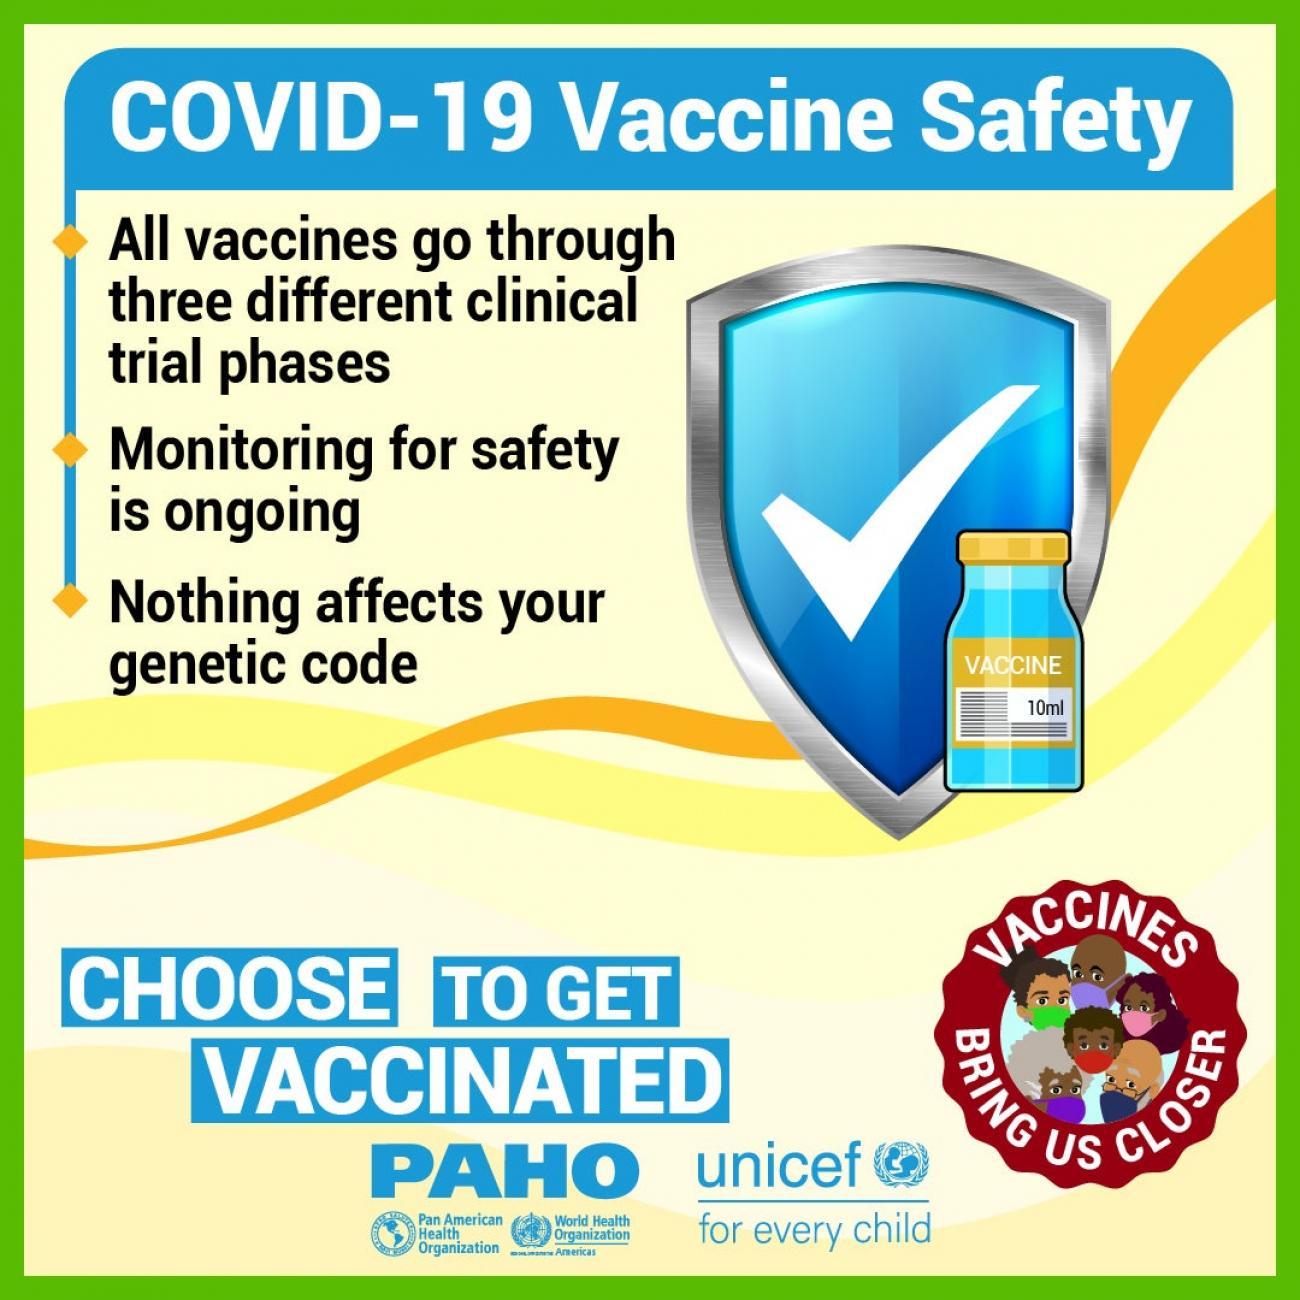 PAHO/WHO UNICEF Vaccination Safety